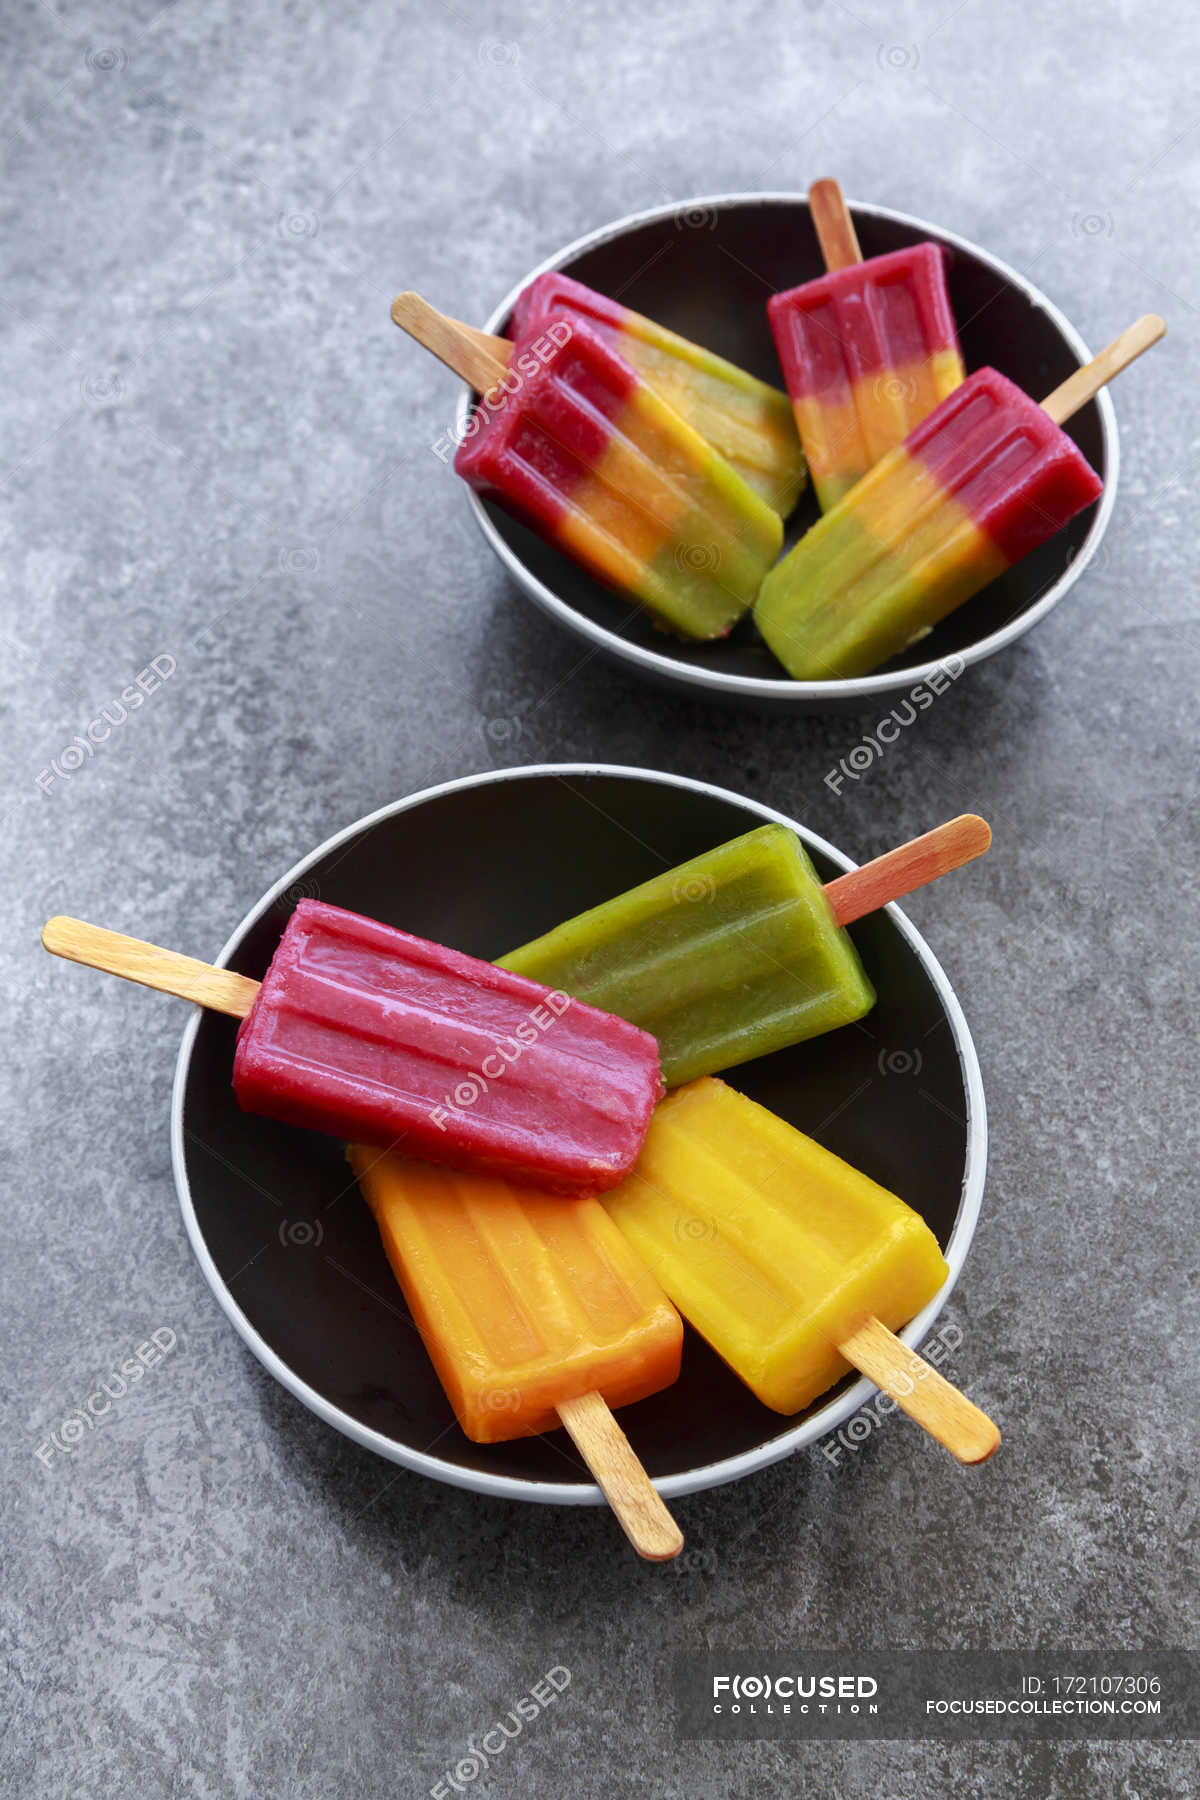 Homemade fruit smoothie ice lollies — sweet, food - Stock Photo | #172107306